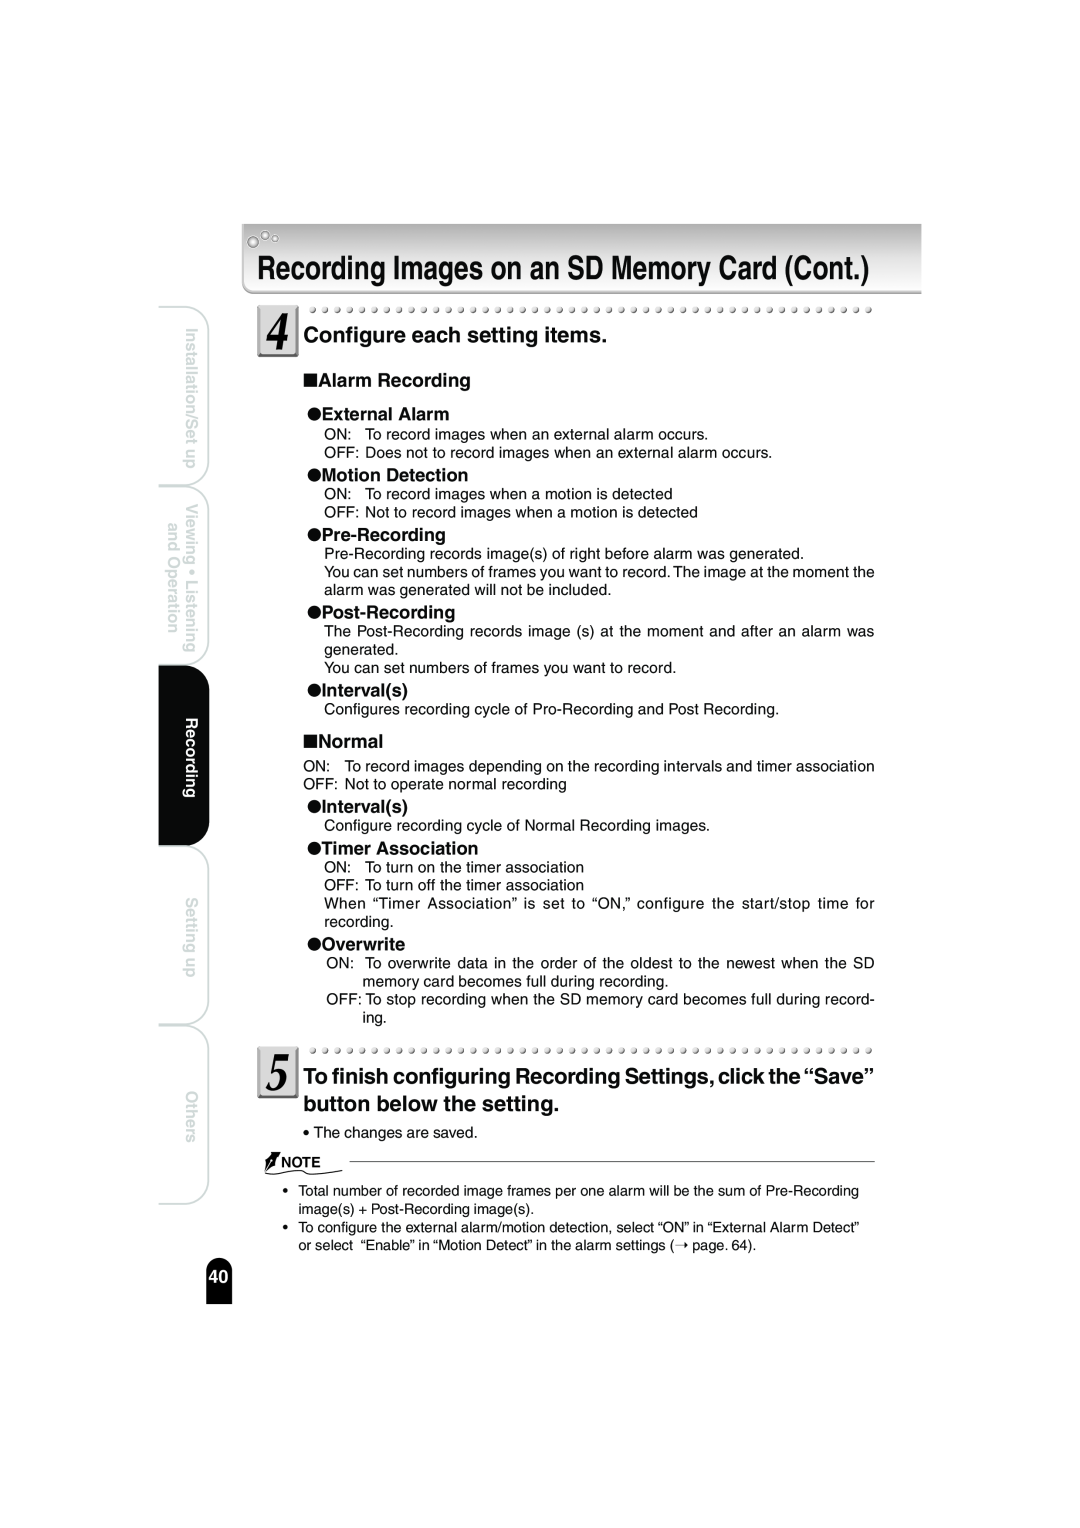 Toshiba IK-WB02A Recording Images on an SD Memory Card Cont, Configure each setting items, Alarm Recording, Normal, Others 